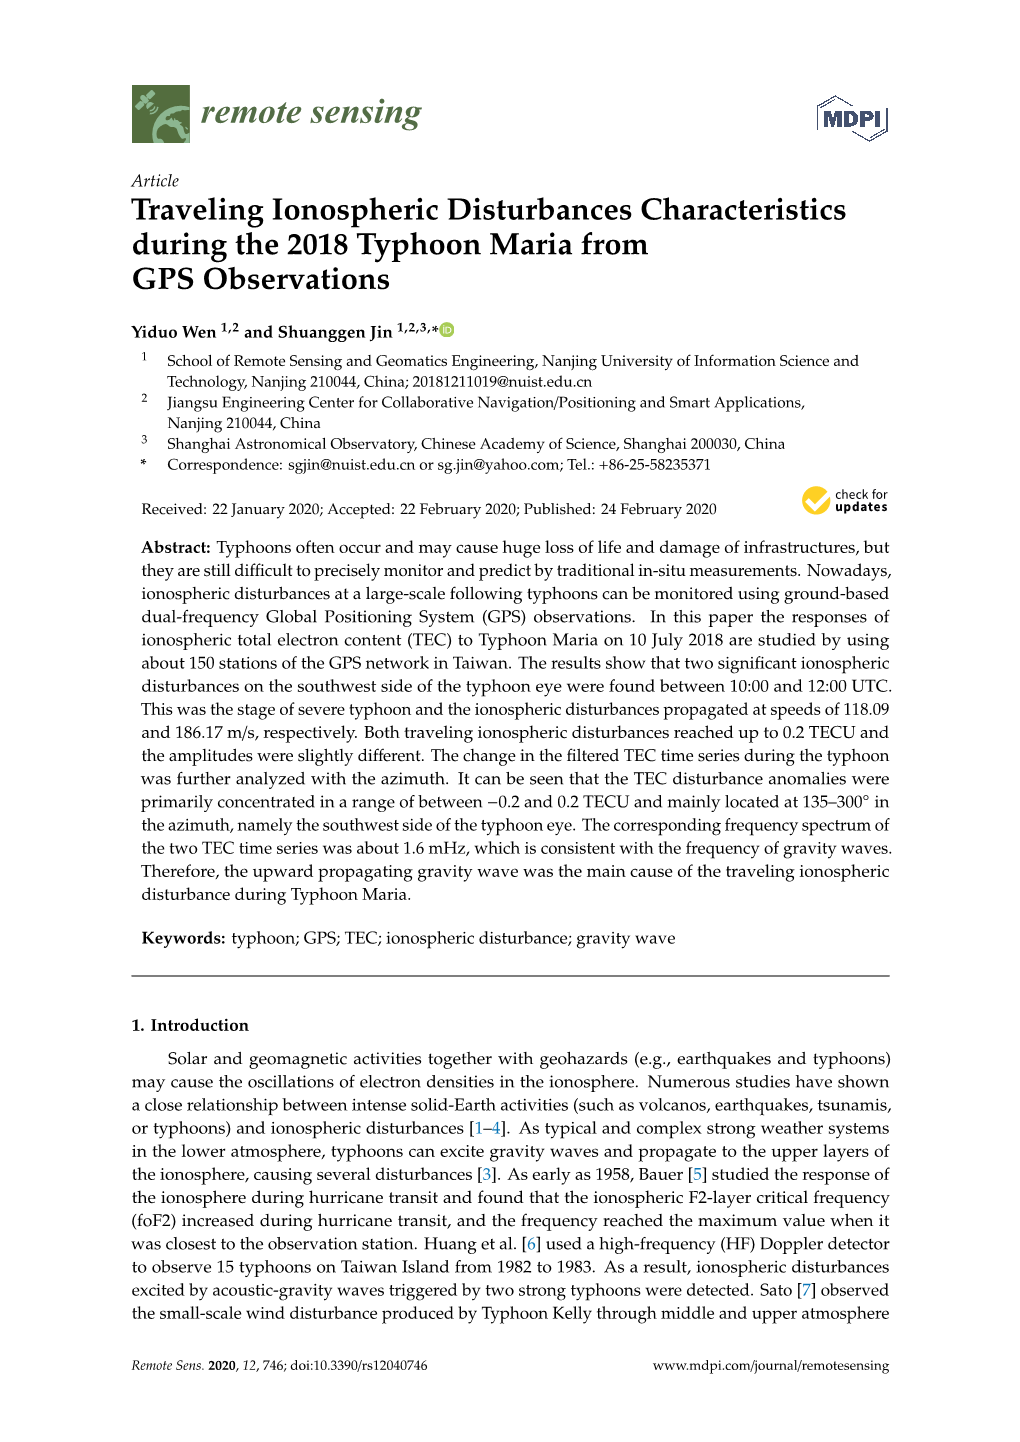 Traveling Ionospheric Disturbances Characteristics During the 2018 Typhoon Maria from GPS Observations